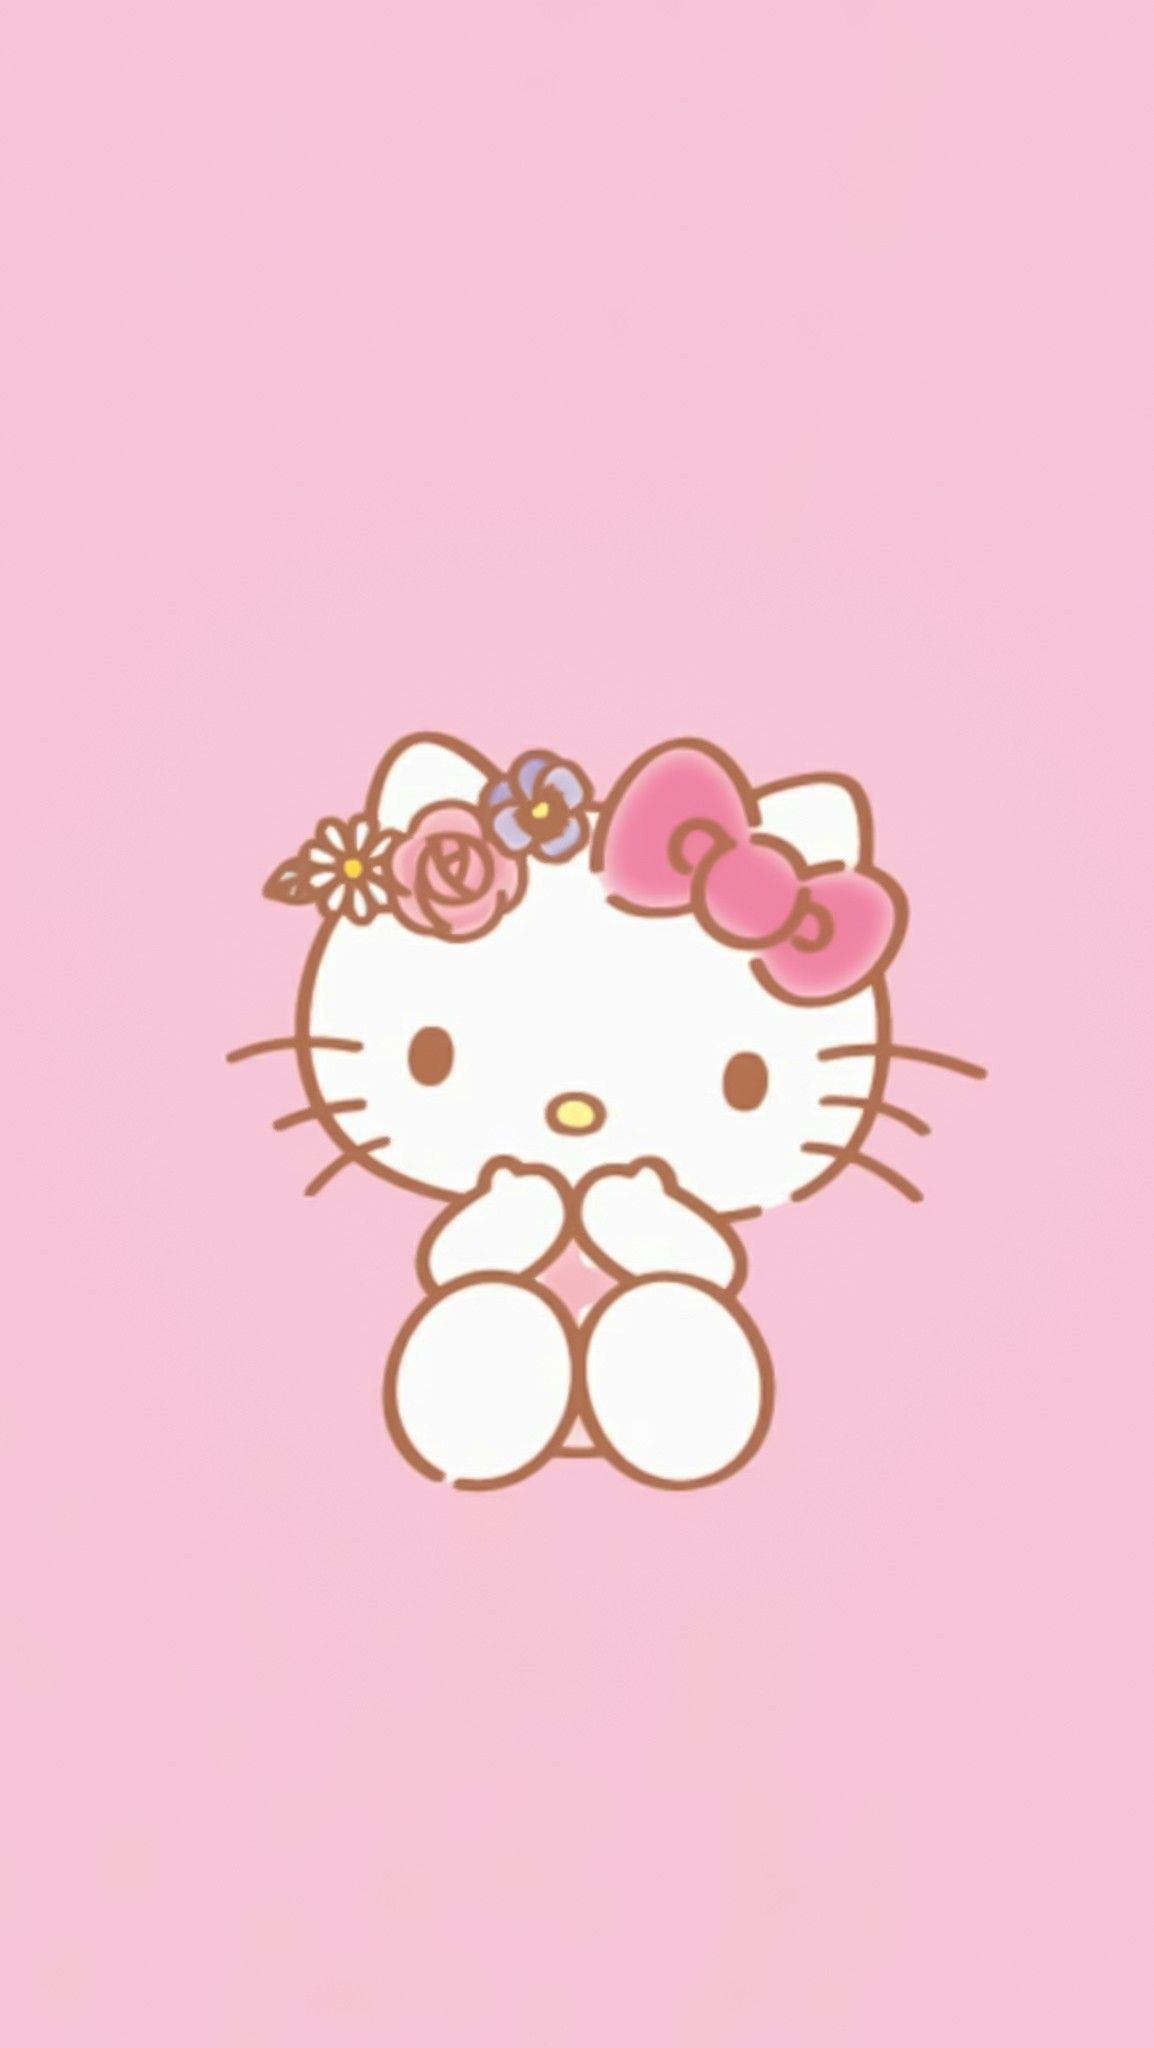 A hello kitty wallpaper with pink background - Hello Kitty